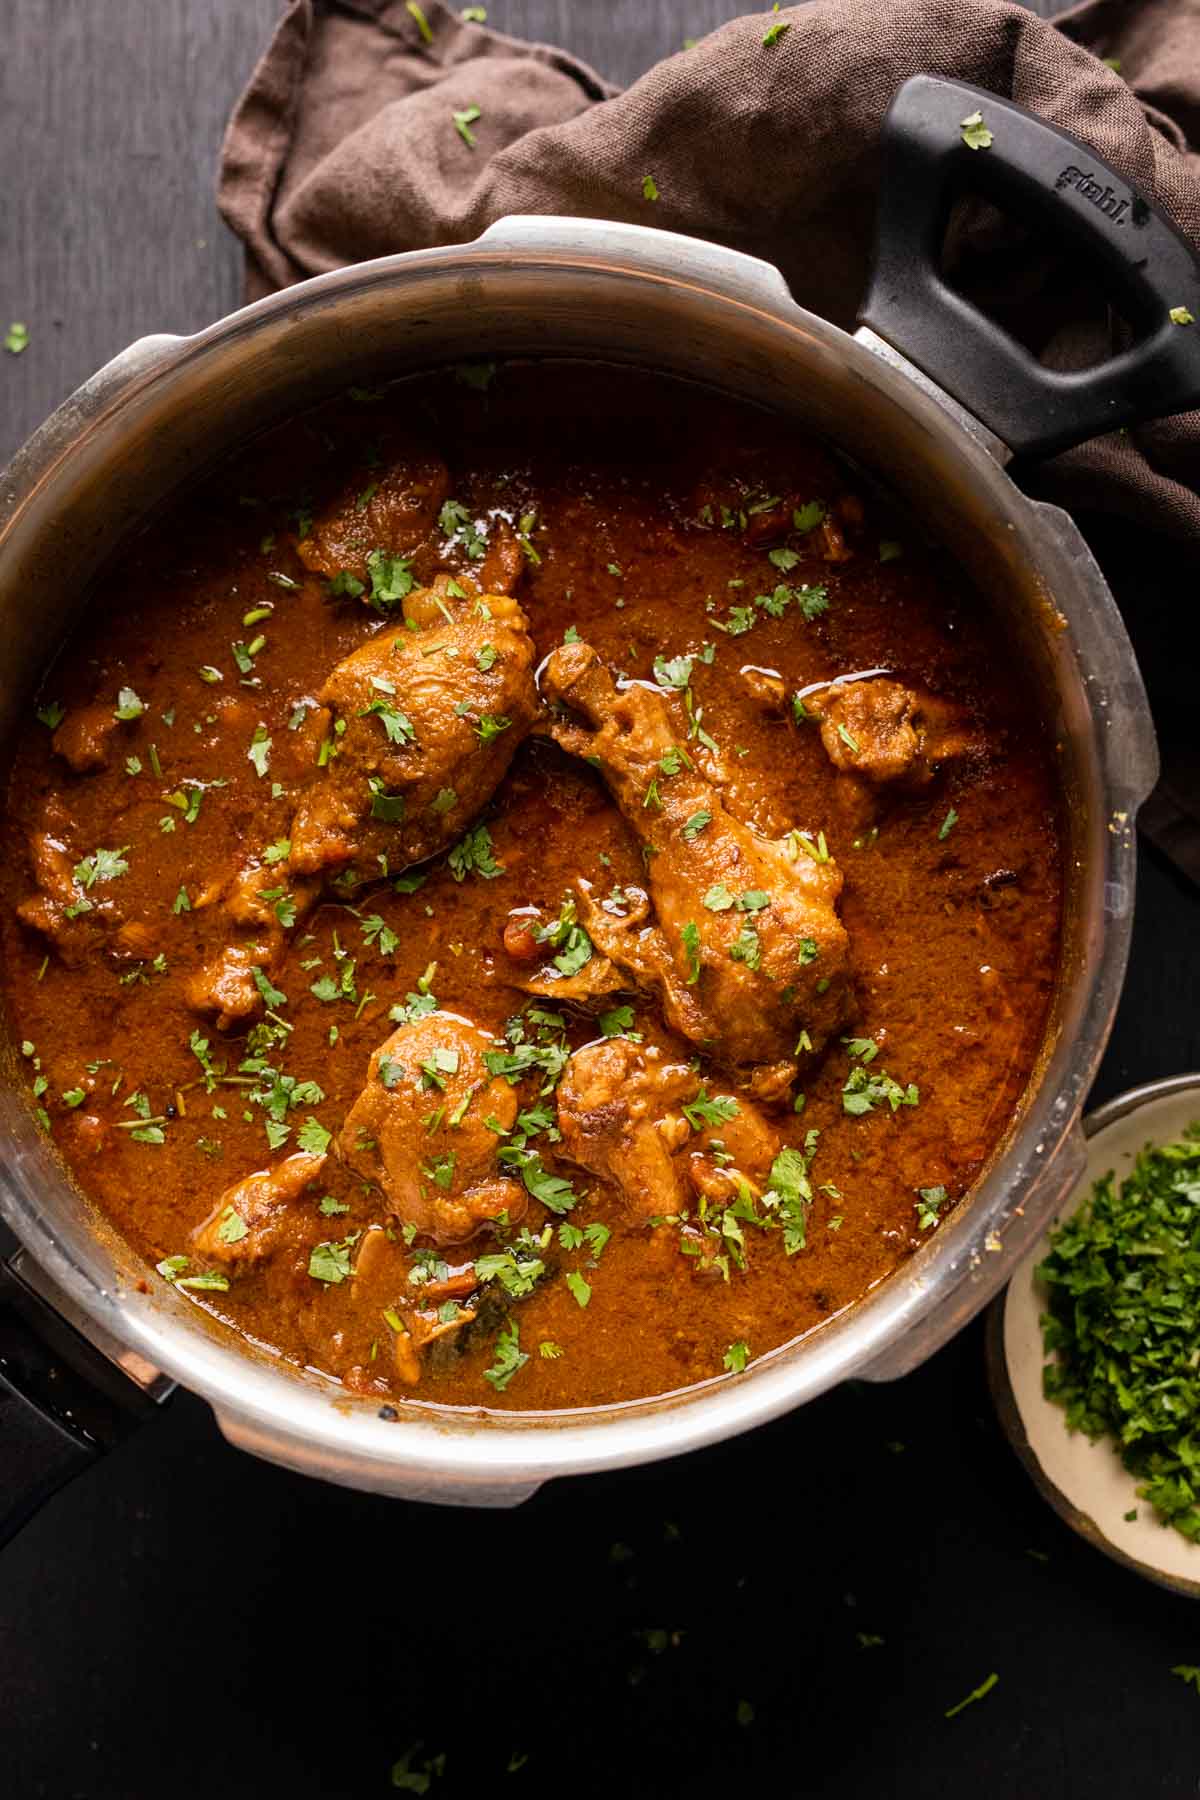 Dhaba style chicken curry served in the pressure cooker it was made in